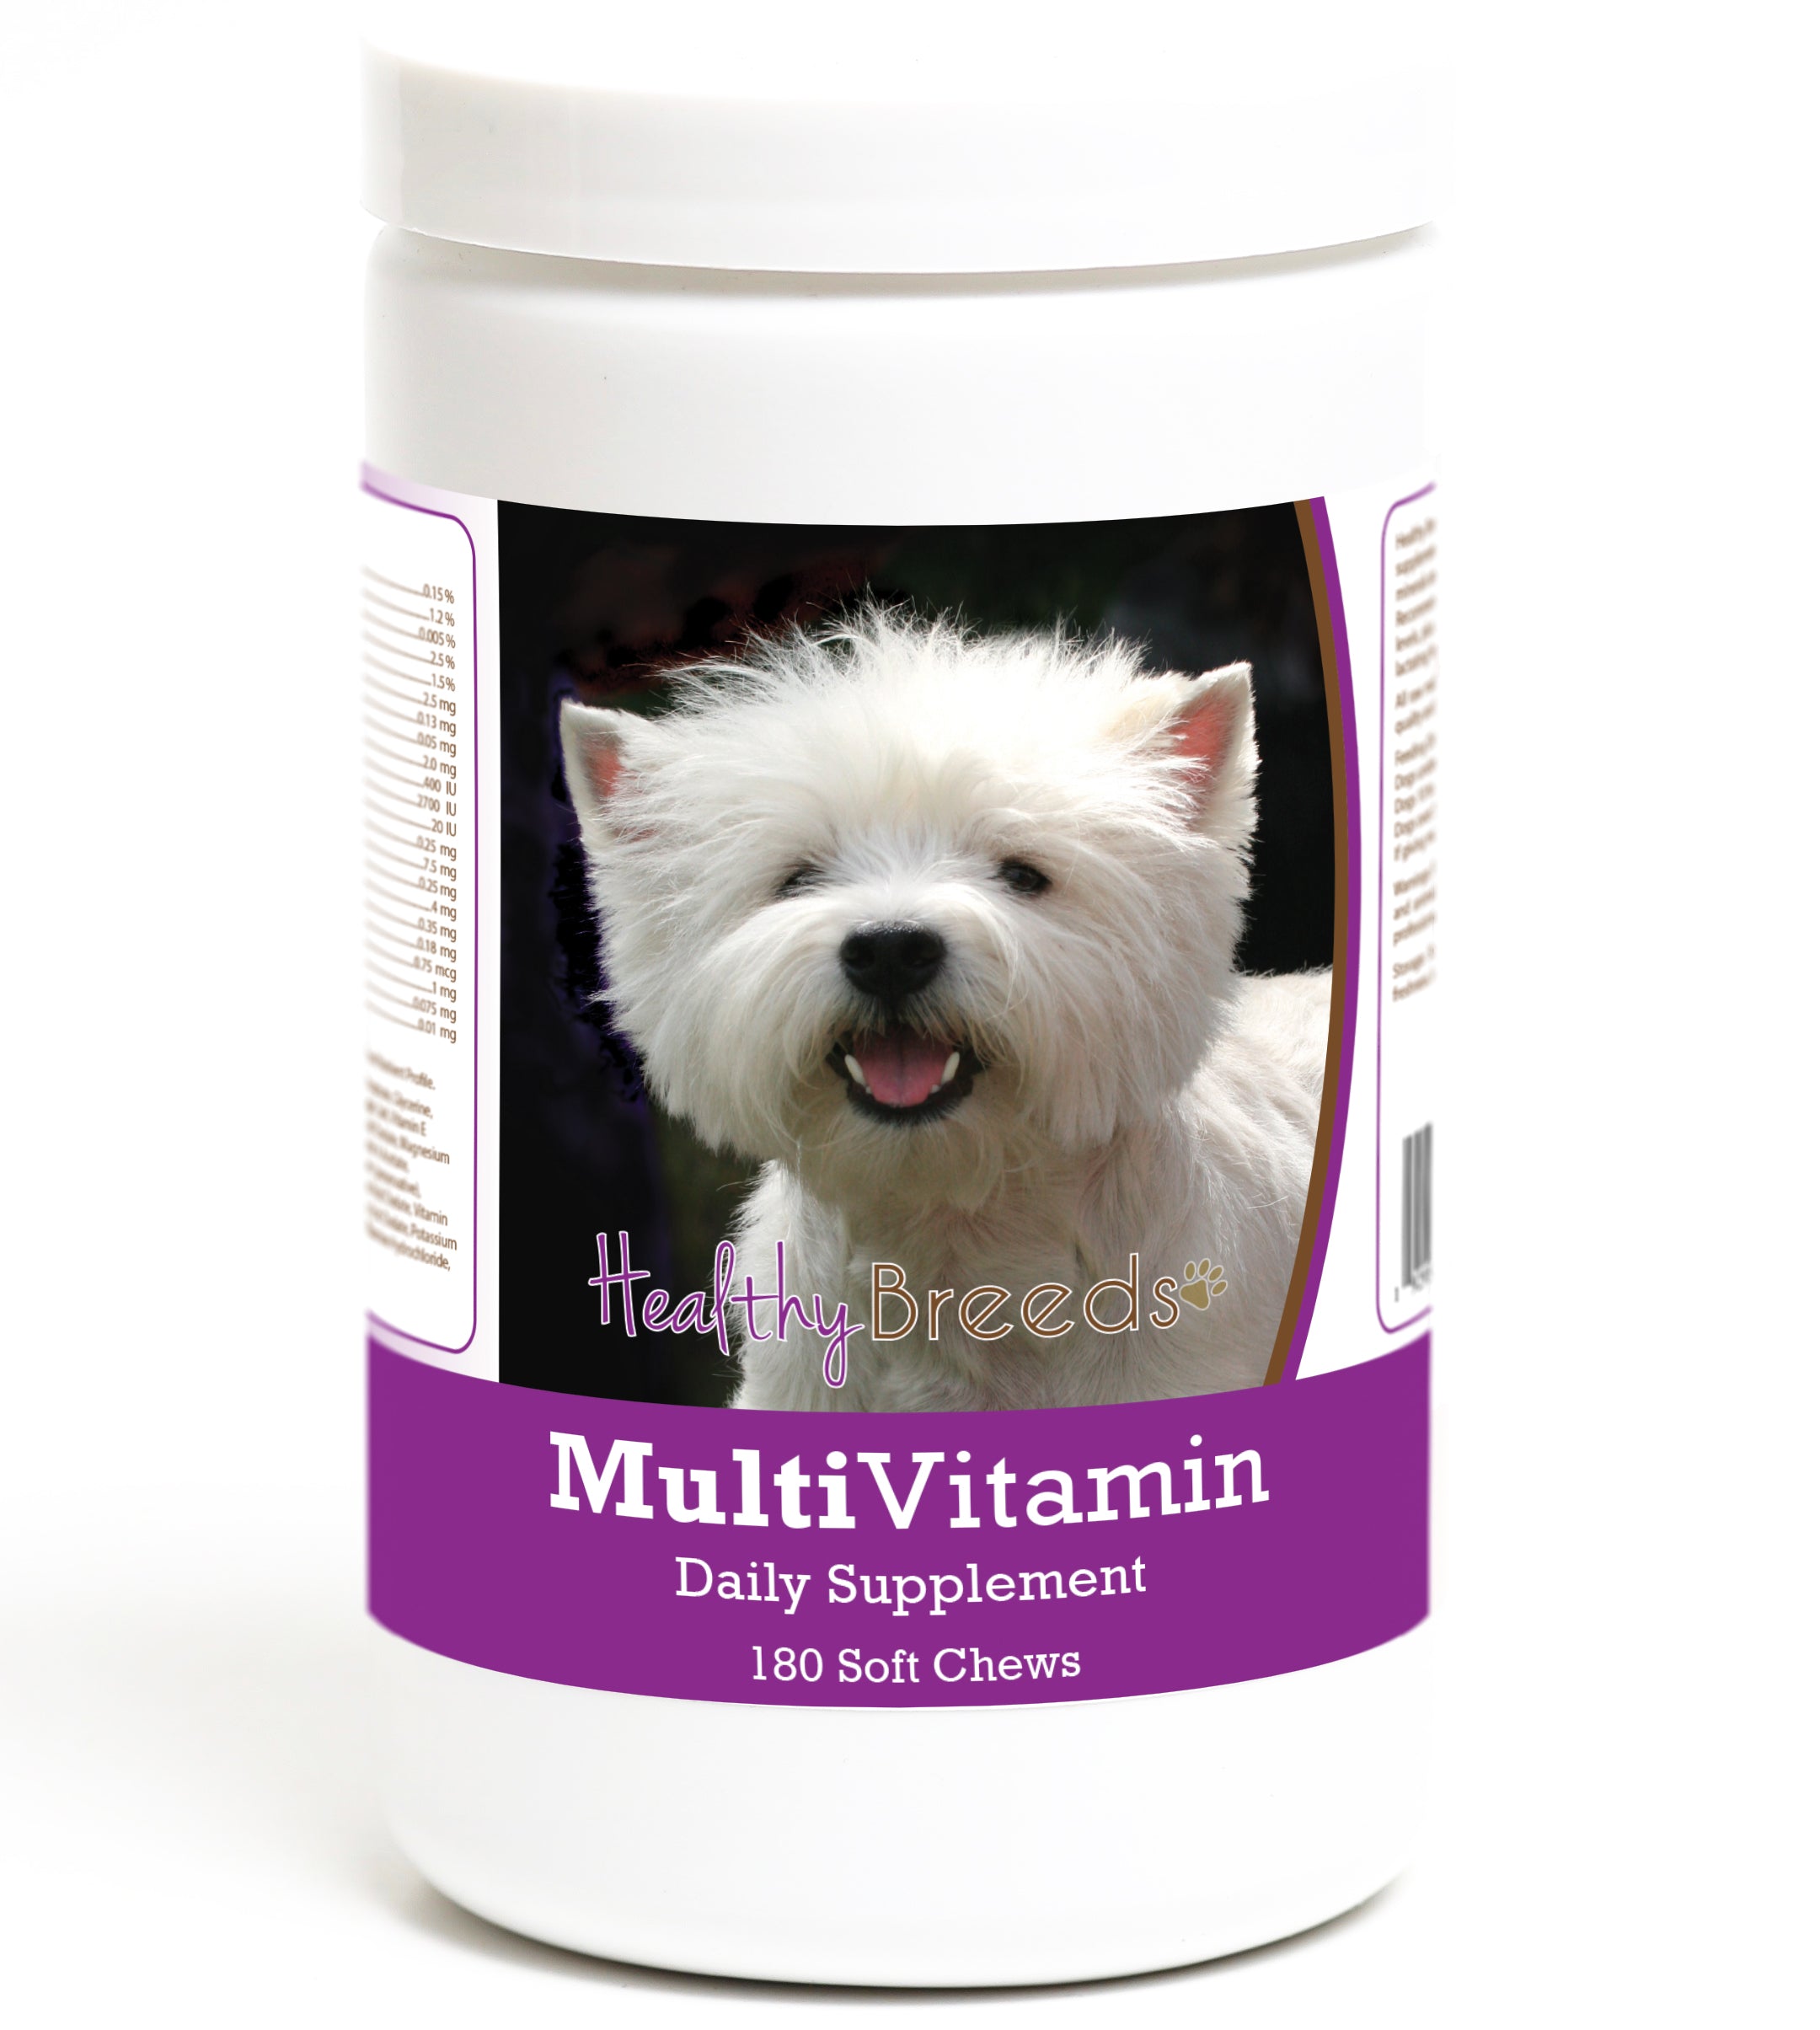 West Highland White Terrier Multivitamin Soft Chew for Dogs 180 Count